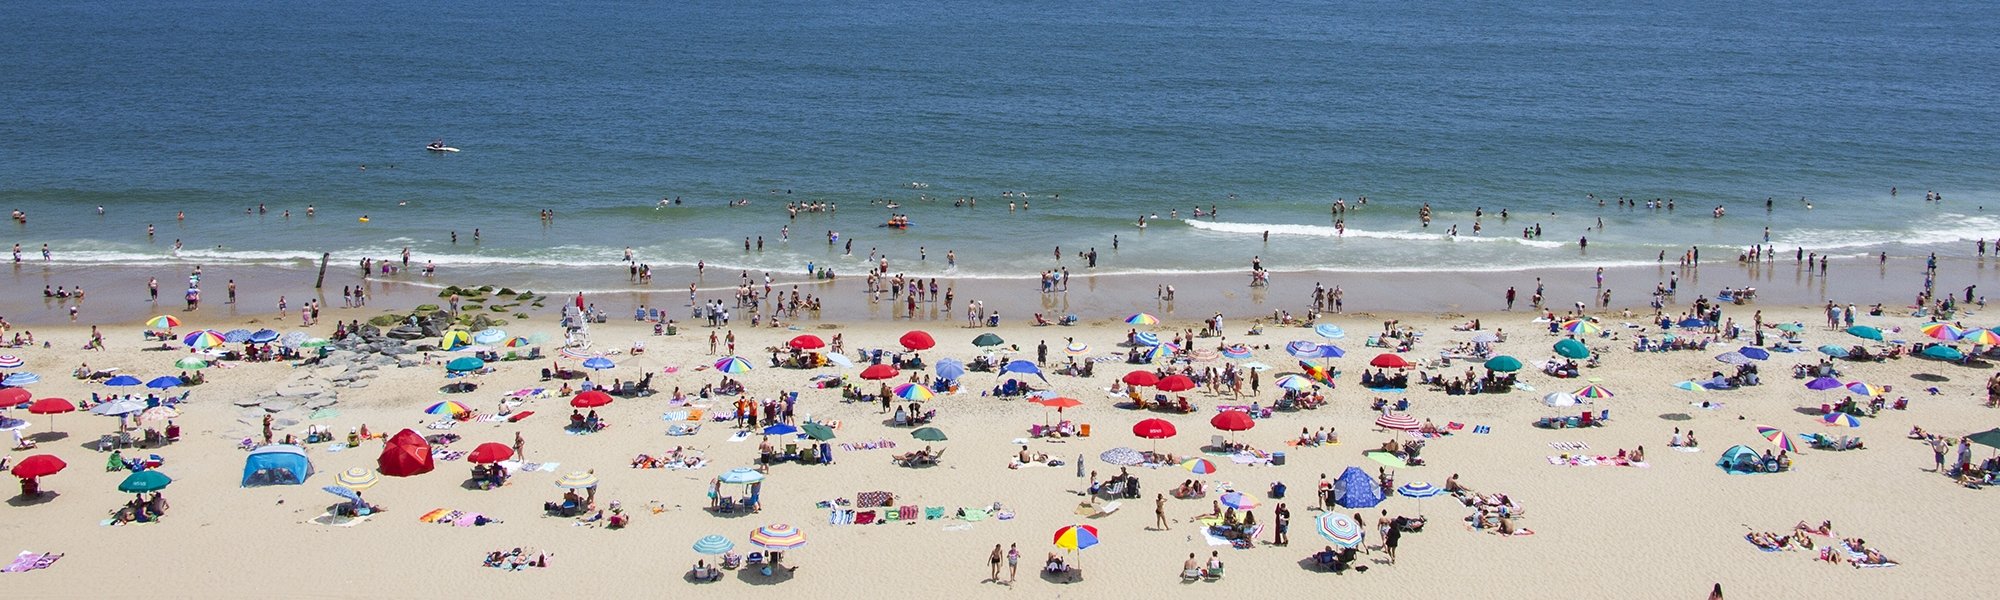 beaches of ocean city md crowded with people 